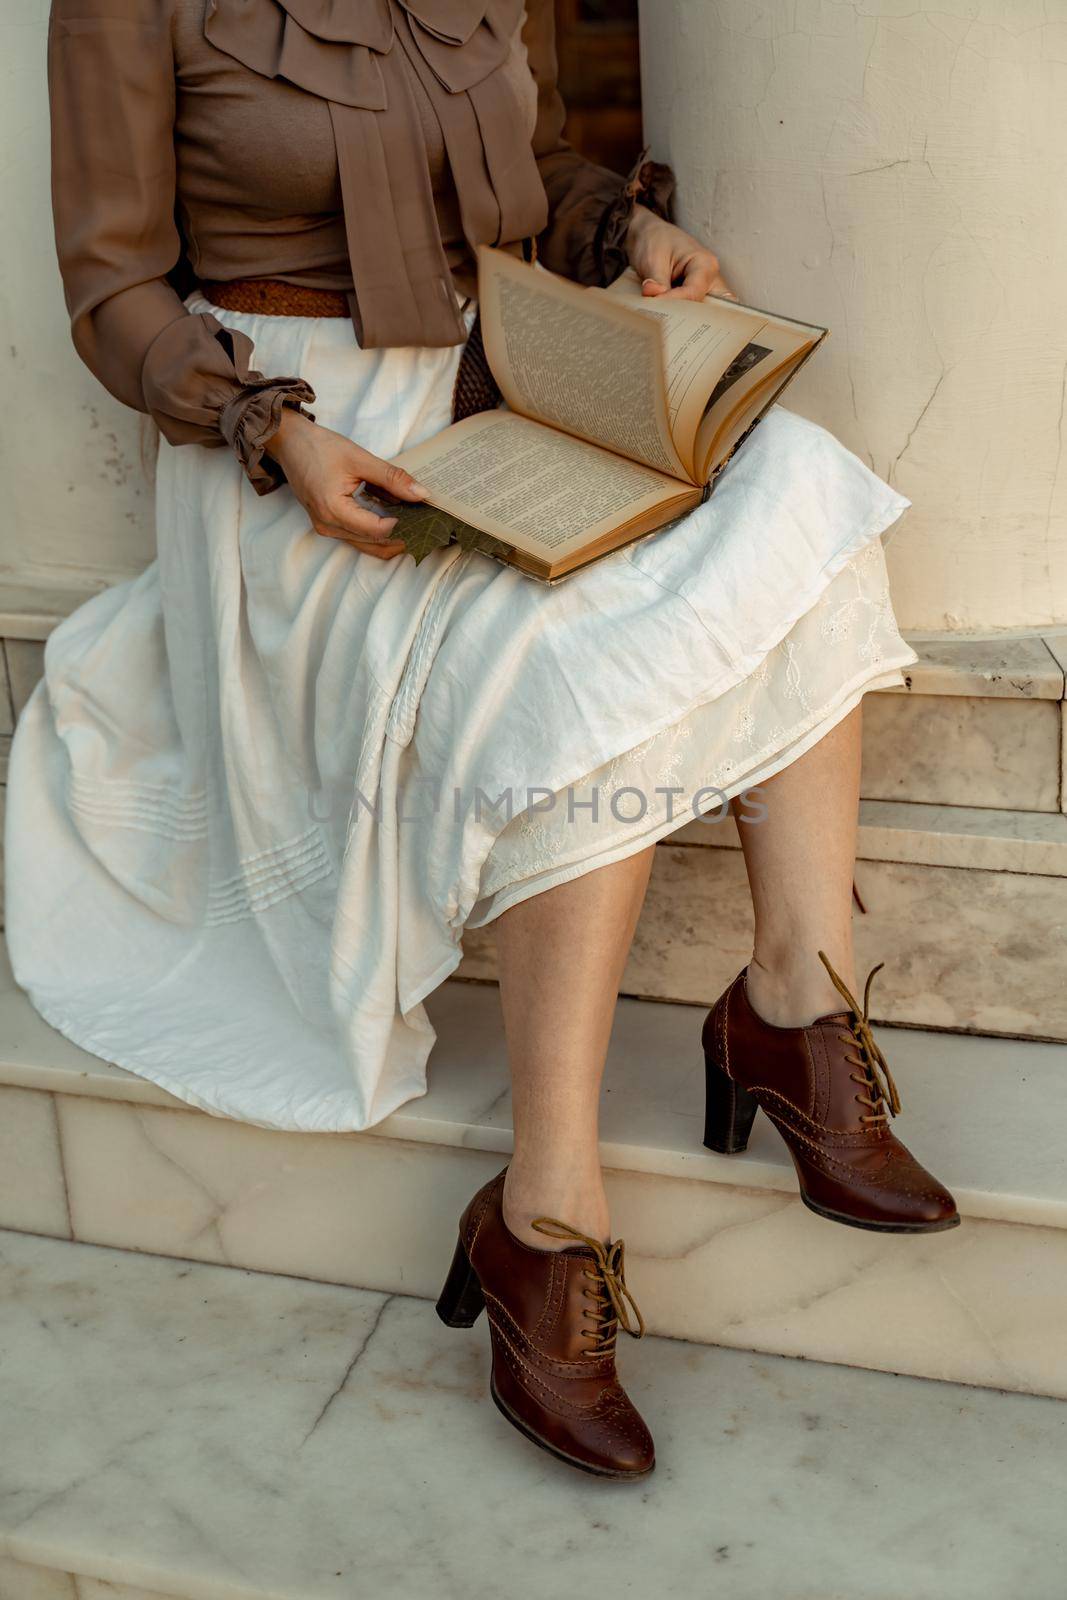 A woman in a white skirt and brown blouse sits and holds an open book in her hands. She is reading a book